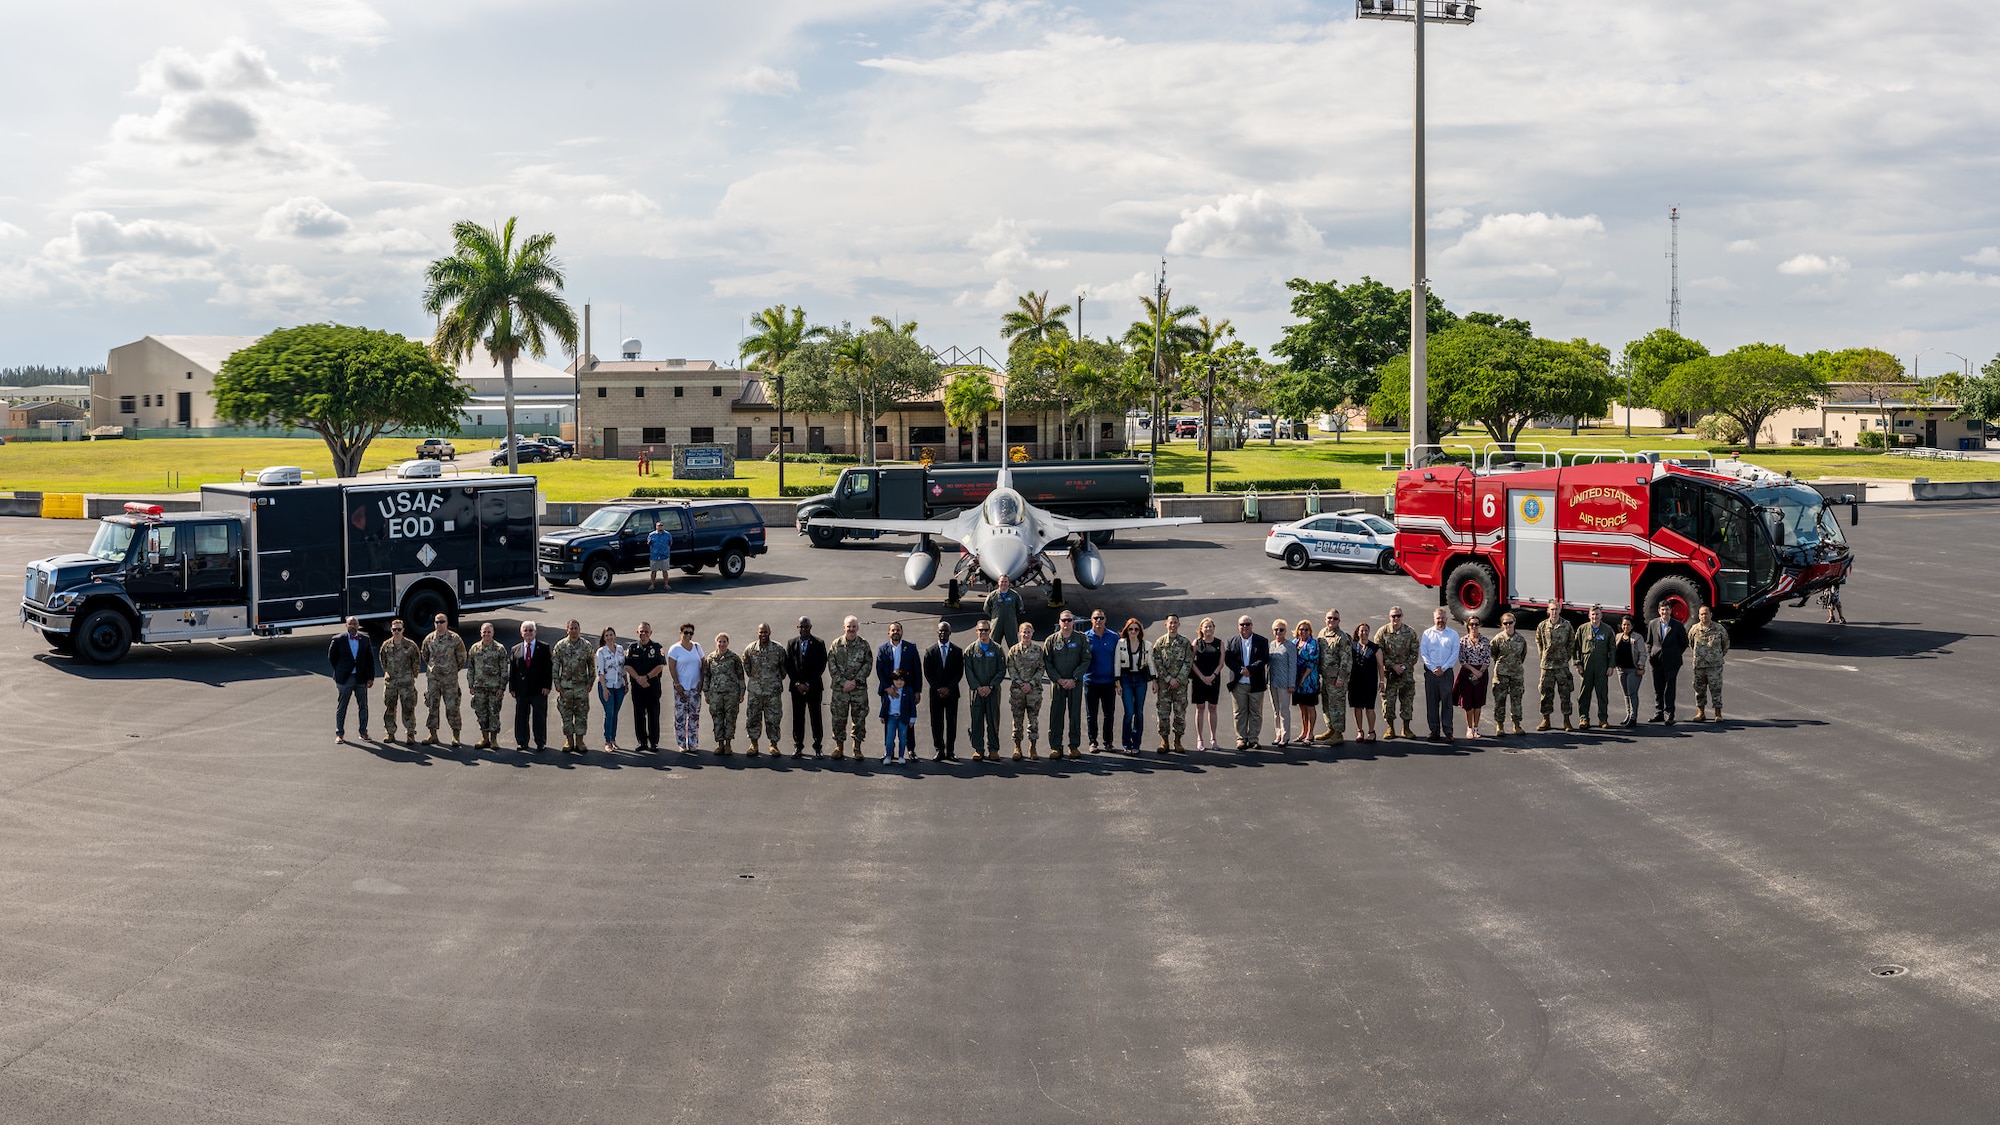 The newest class of 482nd Fighter Wing Honorary Commanders pose for a group picture after a brief induction ceremony at Homestead Air Reserve Base on April 29, 2022.The Honorary Commanders Program is an Air Force sponsored program to encourage an exchange of ideas, sharing experiences and fostering friendships between key civic leaders from the local area and HARB. (U.S. Air Force photo by Tech. Sgt. Leo Castellano)